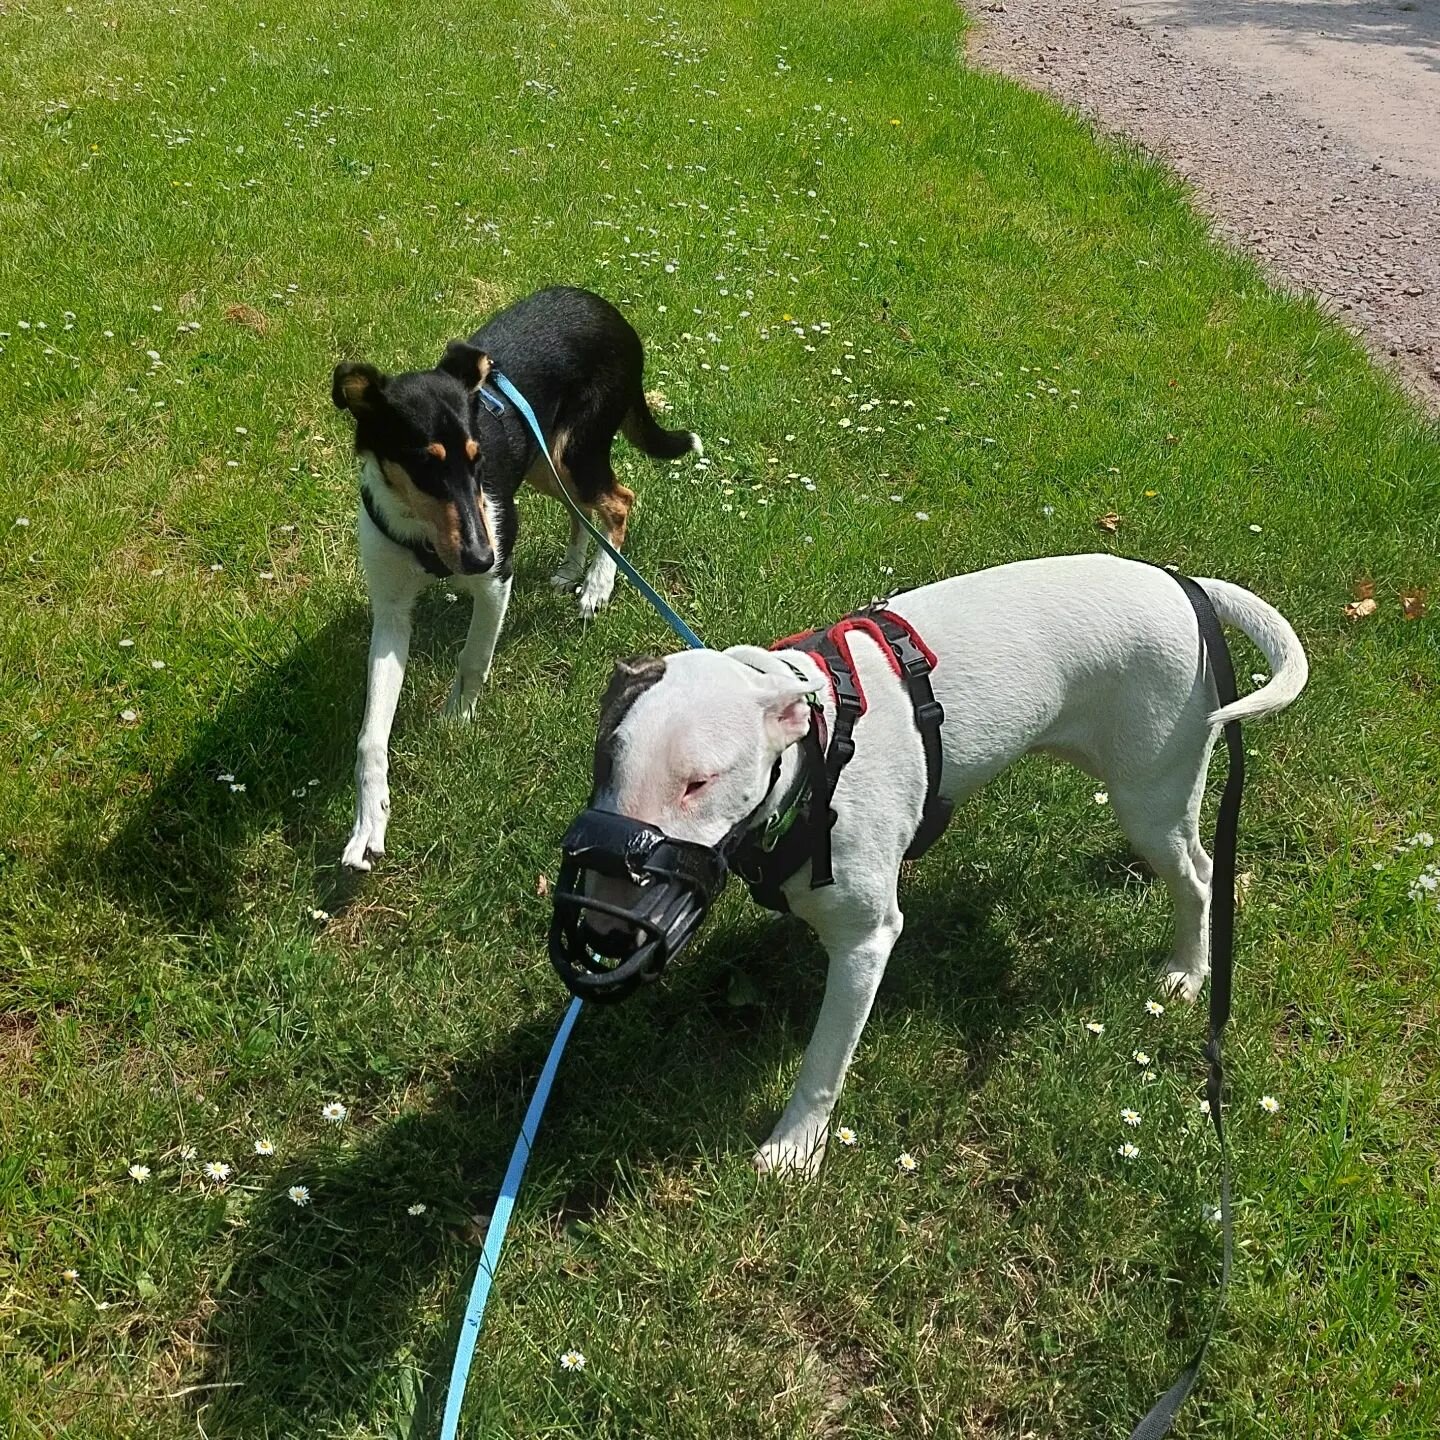 Lovely Bruno joined us for a walk again today while his owners enjoyed a day out. He brought along his baby sister Mable, who is absolutely gorgeous. Bruno is very friendly; he just likes to eat things he shouldn't, so don't be put off when you see a